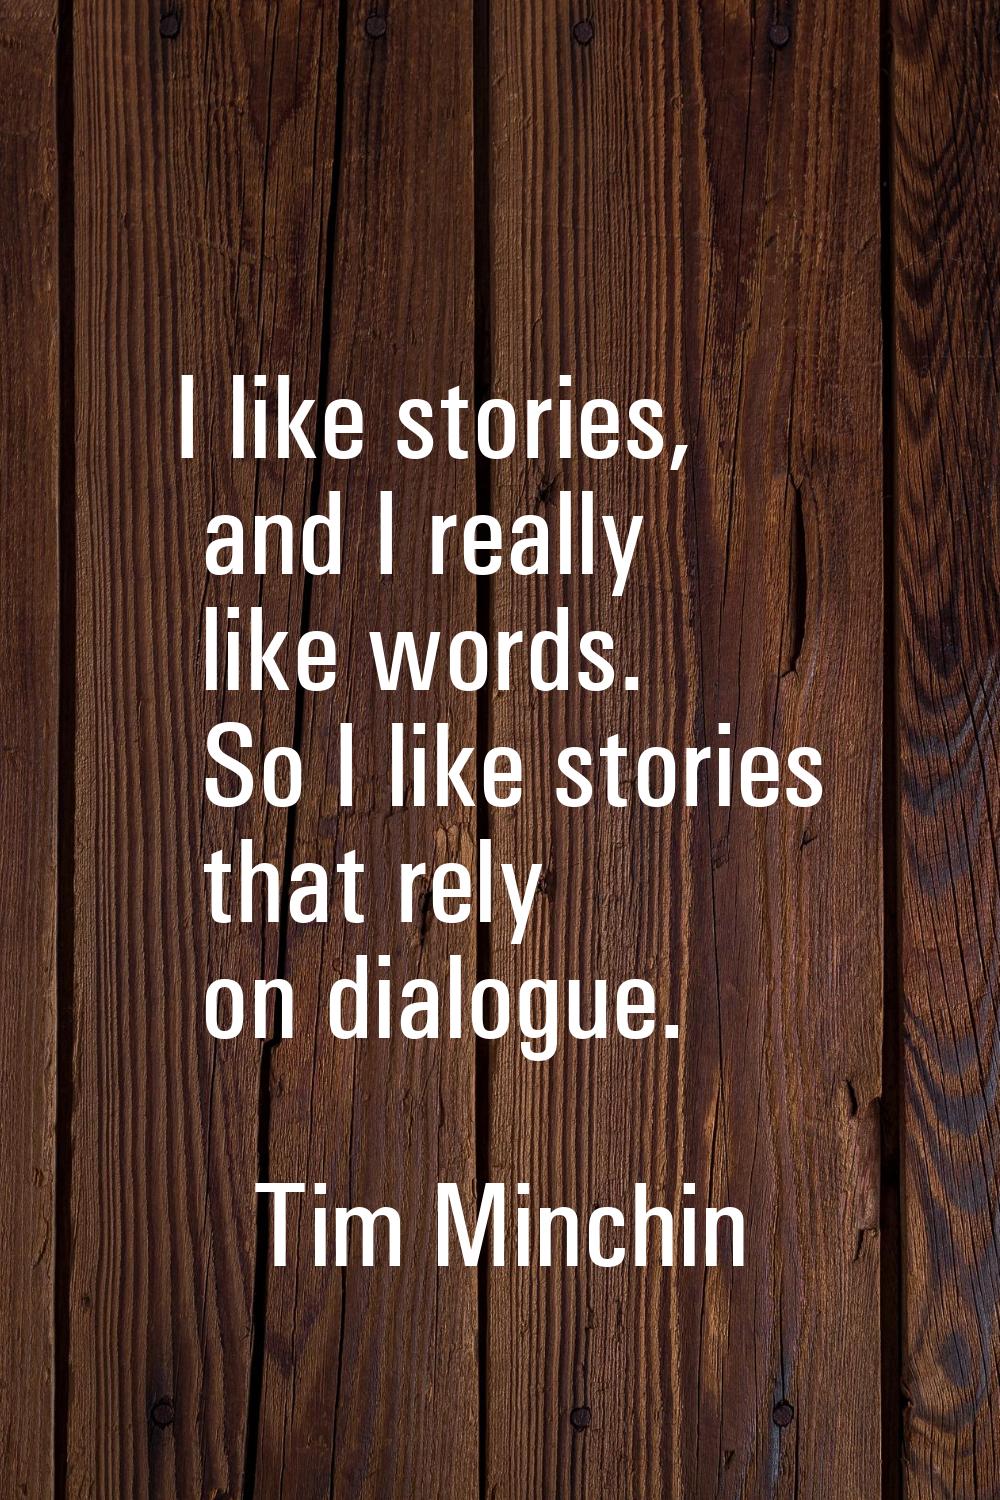 I like stories, and I really like words. So I like stories that rely on dialogue.